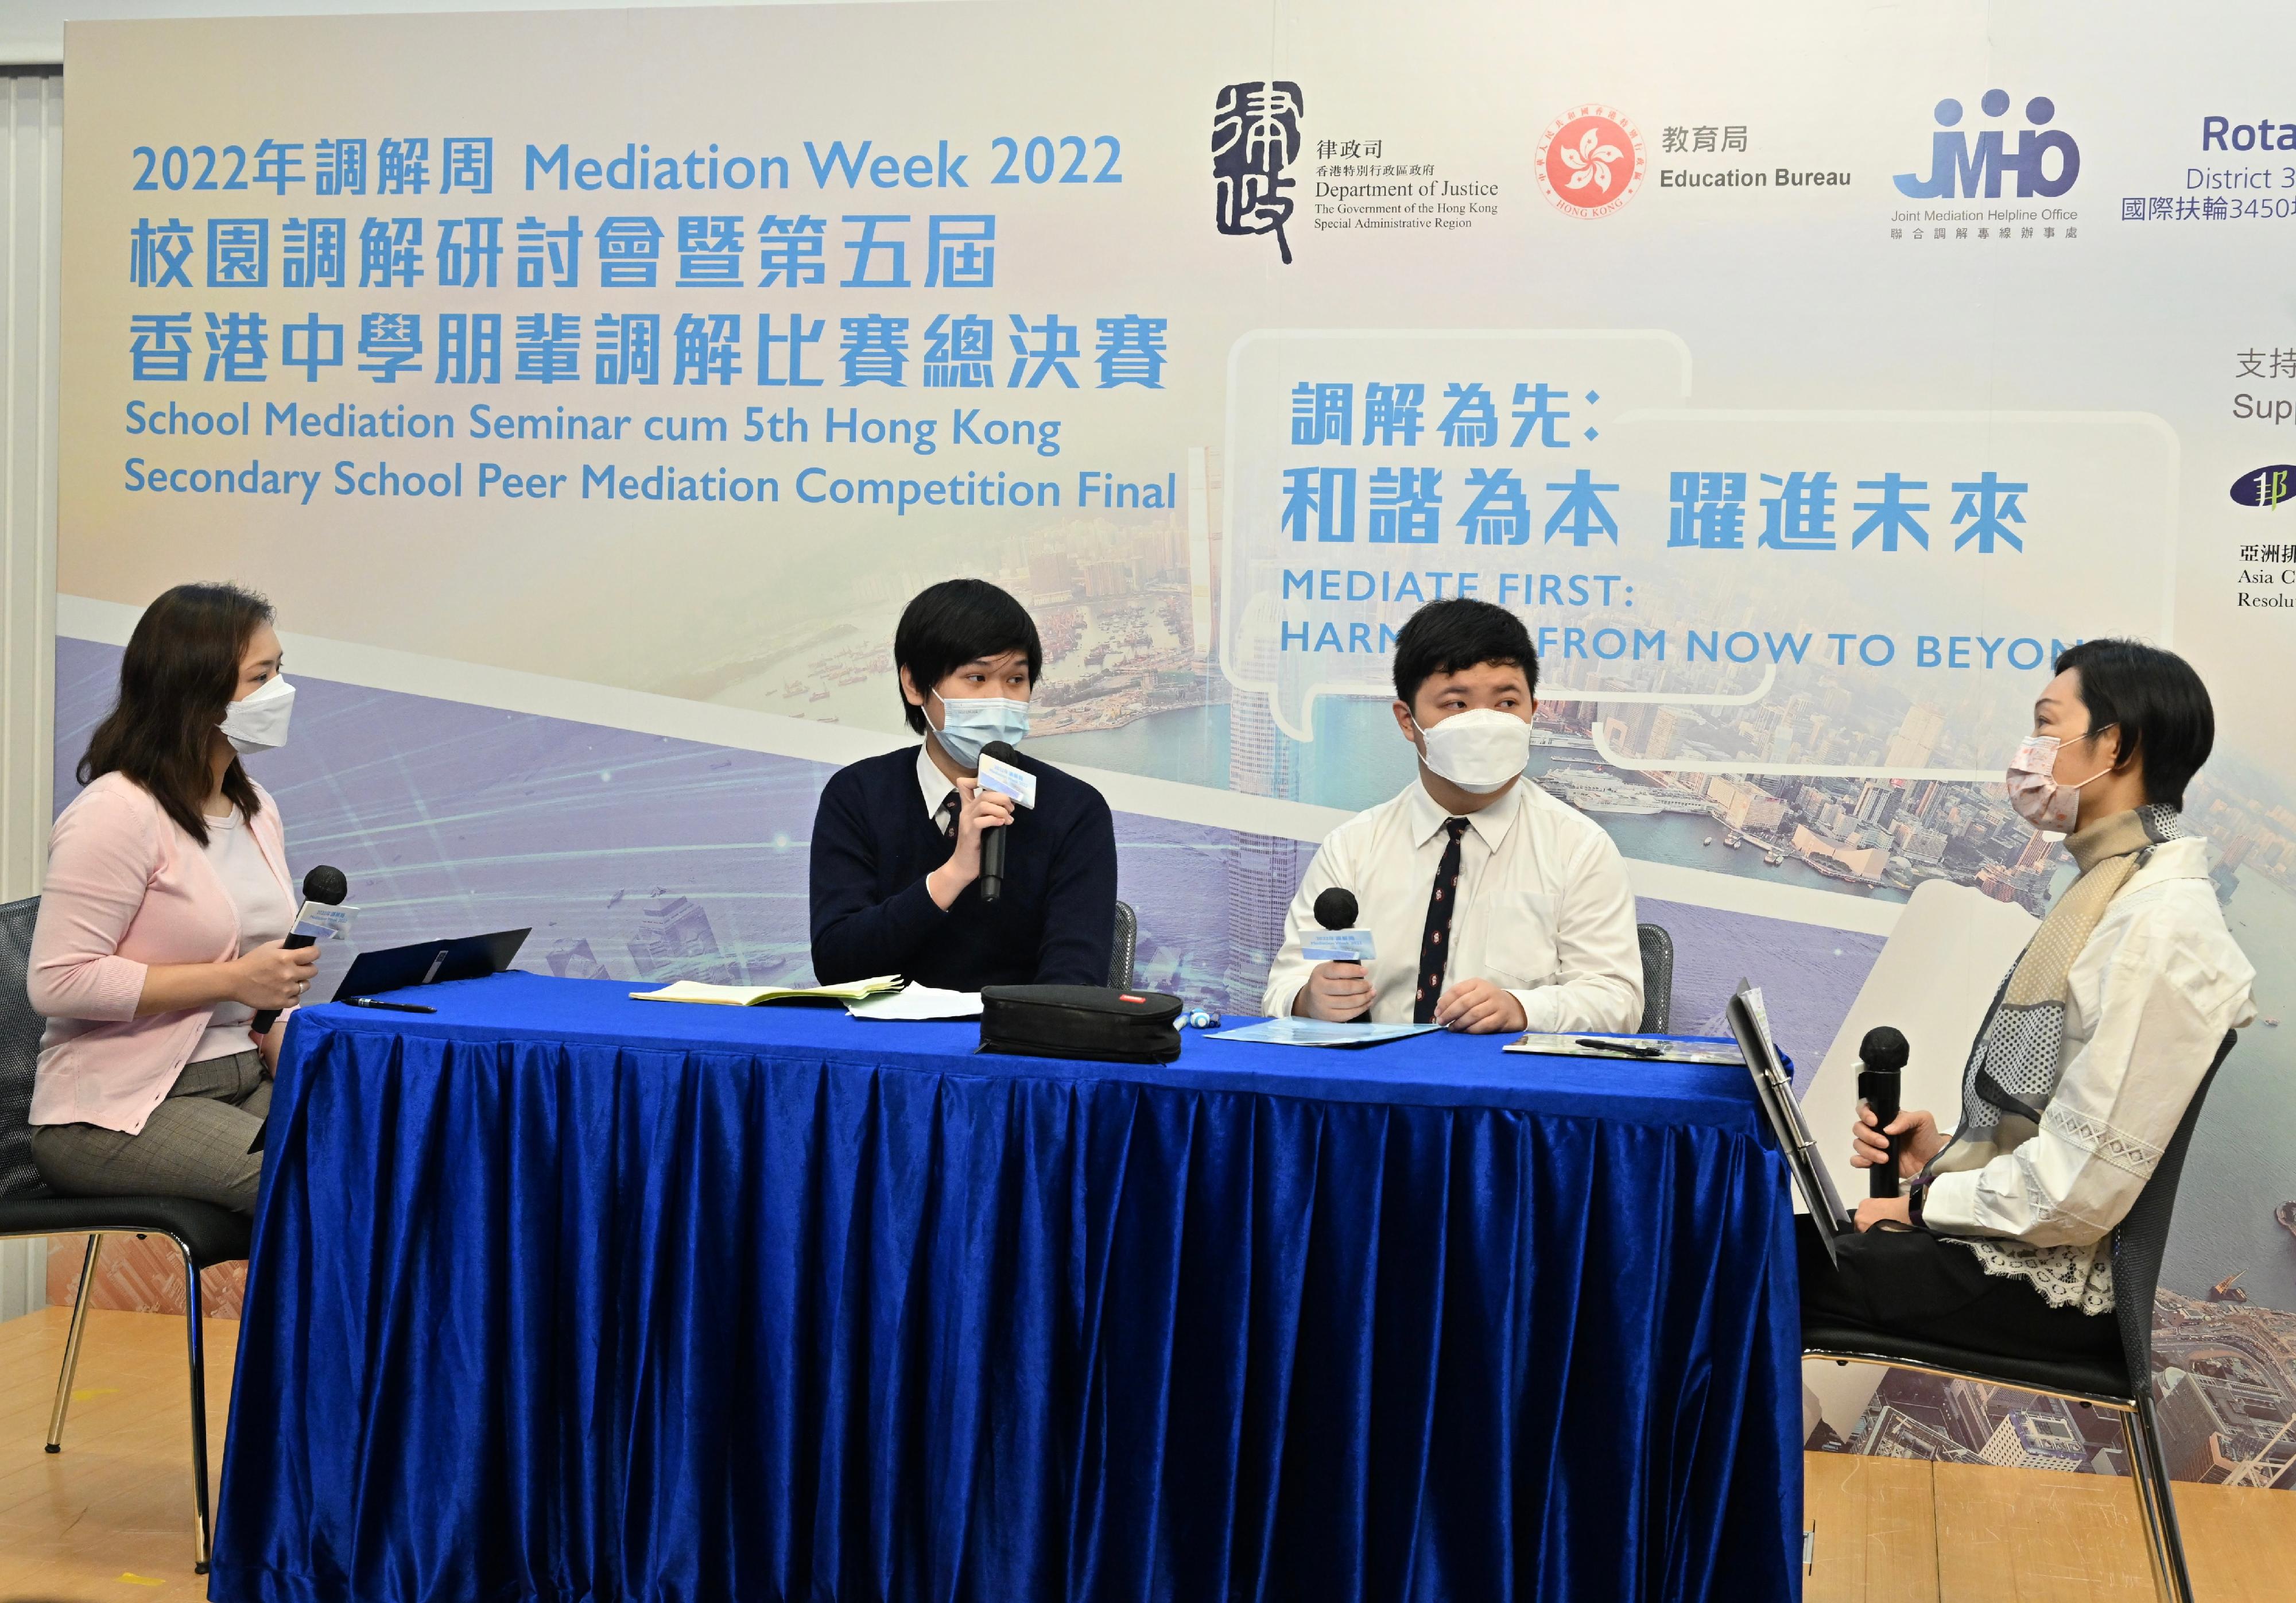 The Mediation Week 2022 organised by the Department of Justice (DoJ) was officially launched today (May 2). Picture shows representatives of Shun Tak Fraternal Association Tam Pak Yu College taking part in the 5th Hong Kong Secondary School Peer Mediation Competition Final.